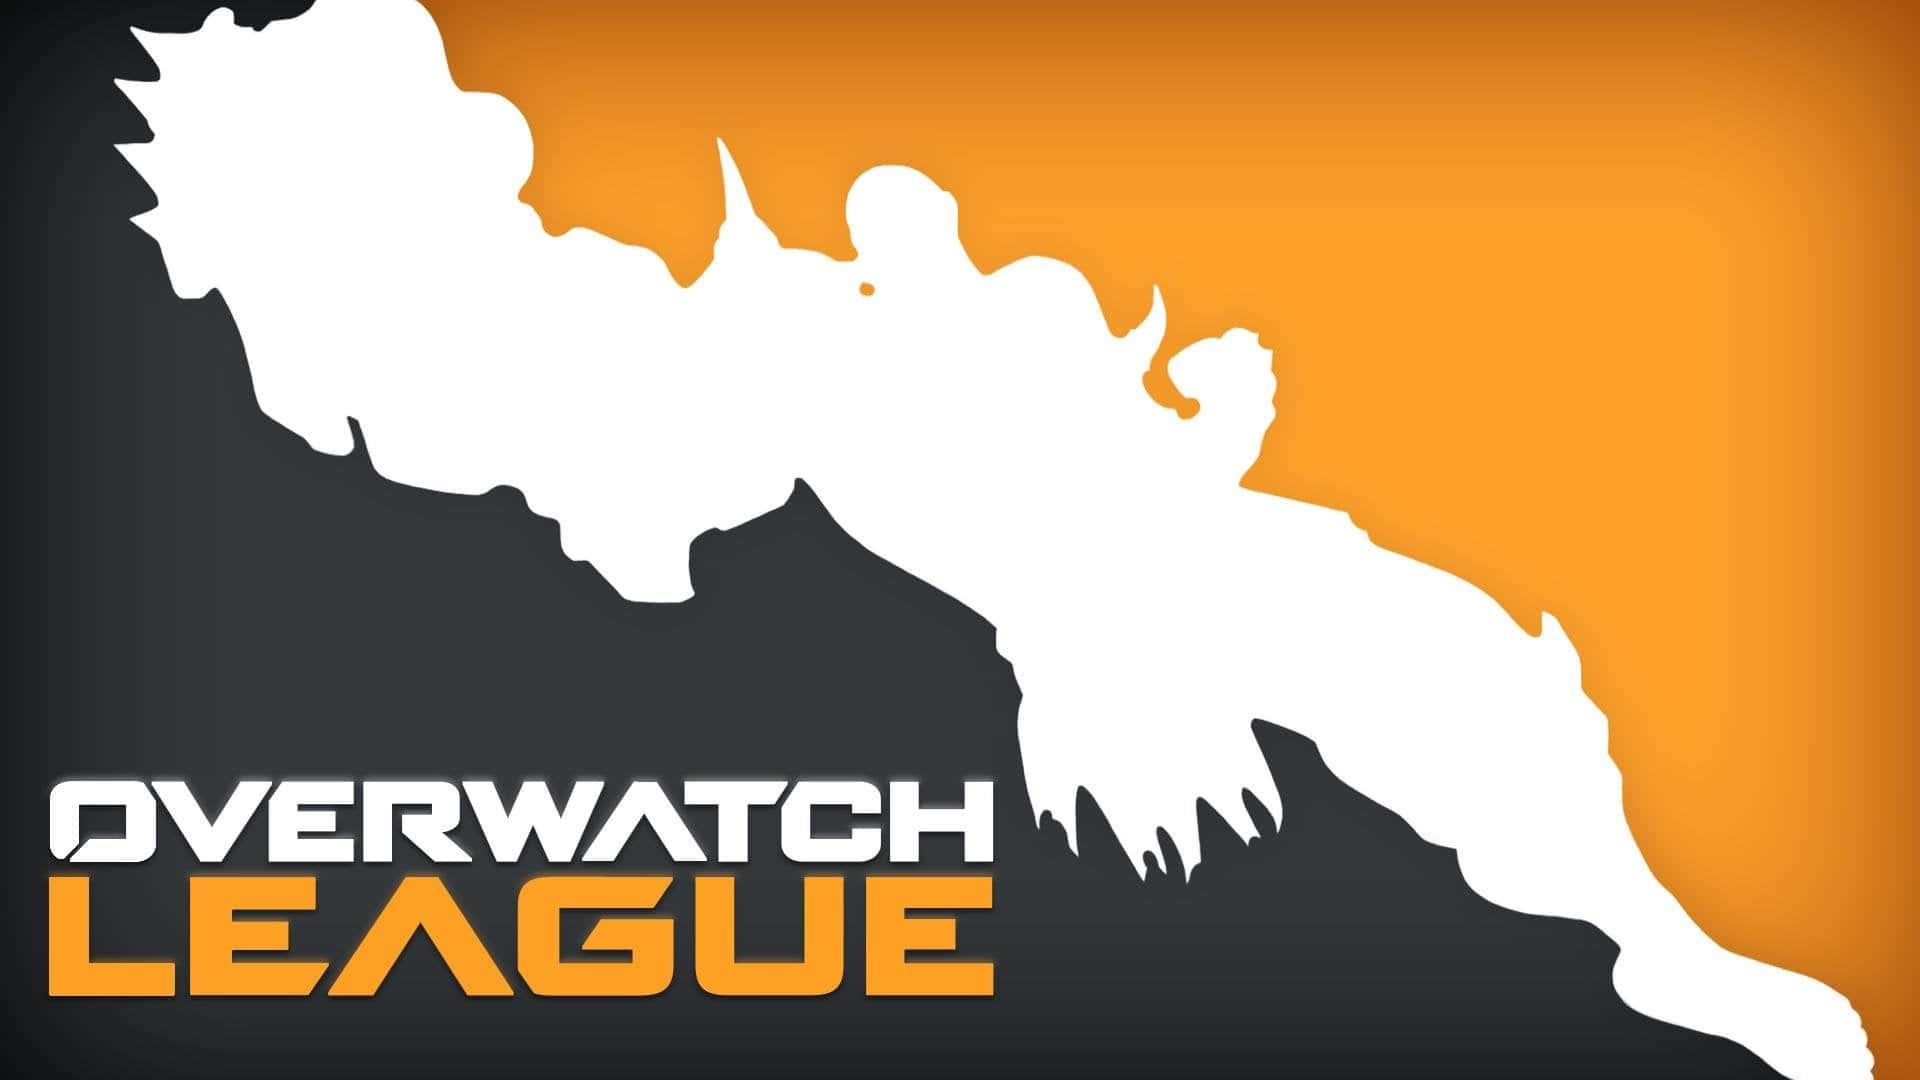 Exciting Overwatch League Match in Full Swing Wallpaper